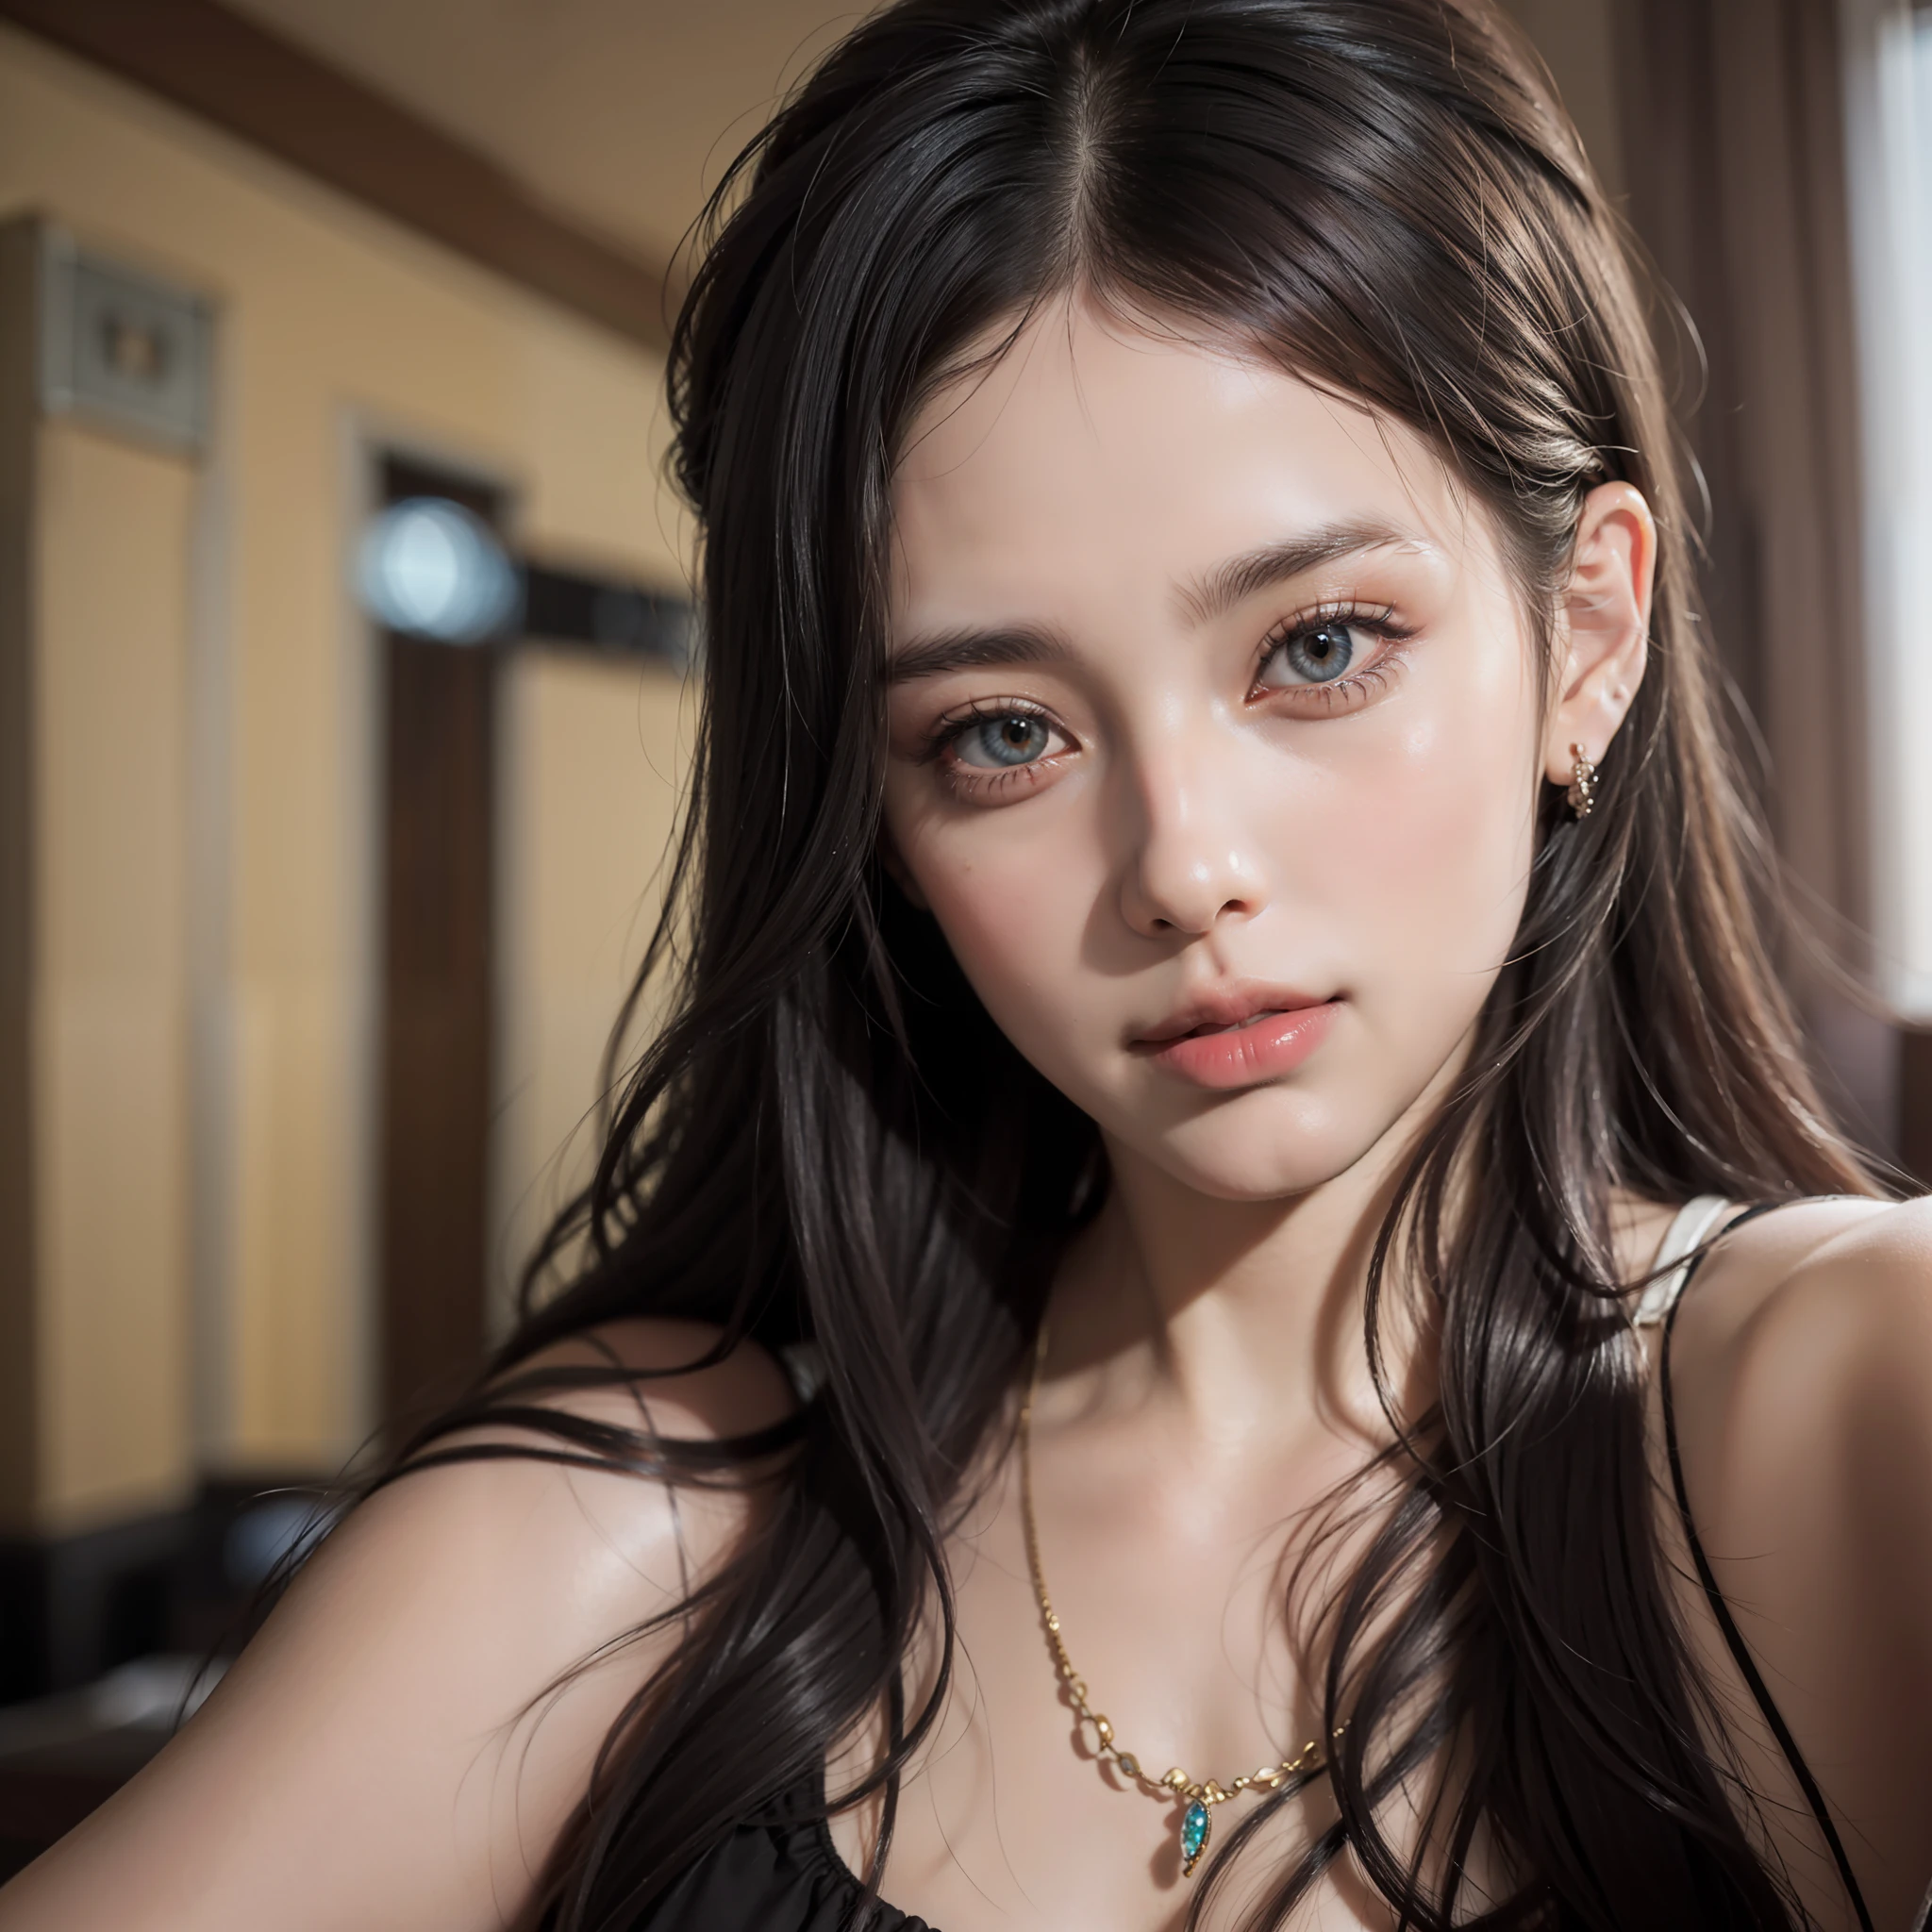 8K, Best Quality, Masterpiece, Ultra High Resolution, (Realism: 1.4), Original Photo, (Realistic Skin Texture: 1.3), (Film Grain: 1.3), (Selfie Angle) 1 Girl, Beautiful Eyes and Face Details, Masterpiece, Best Quality, Close-up, Upper Body, Looking at the Viewer